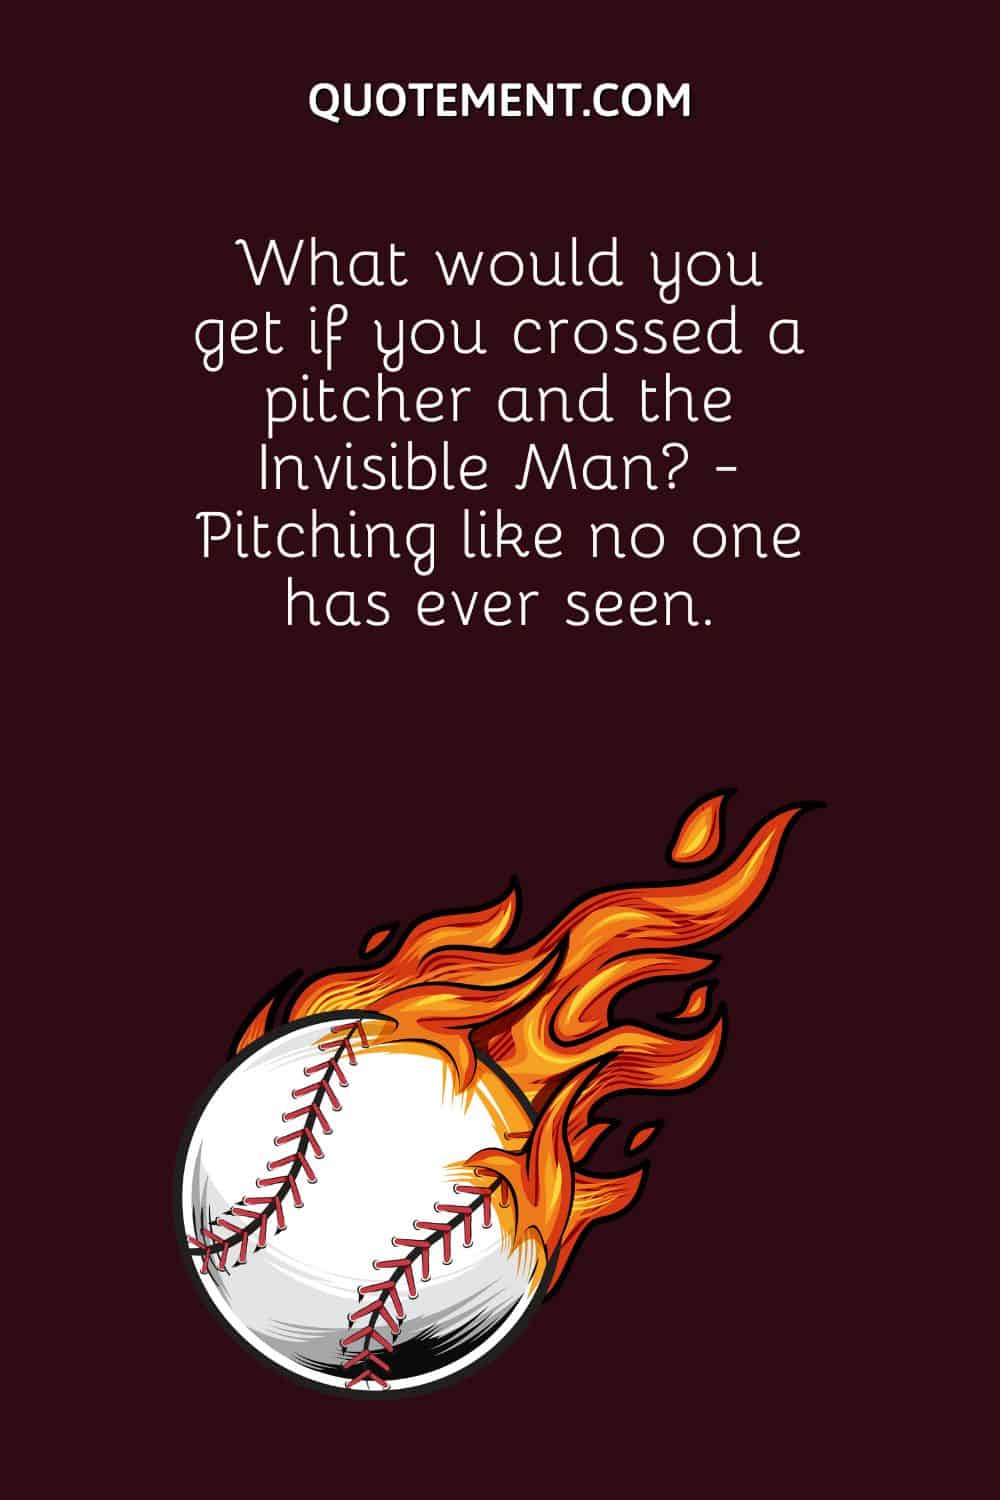 What would you get if you crossed a pitcher and the Invisible Man